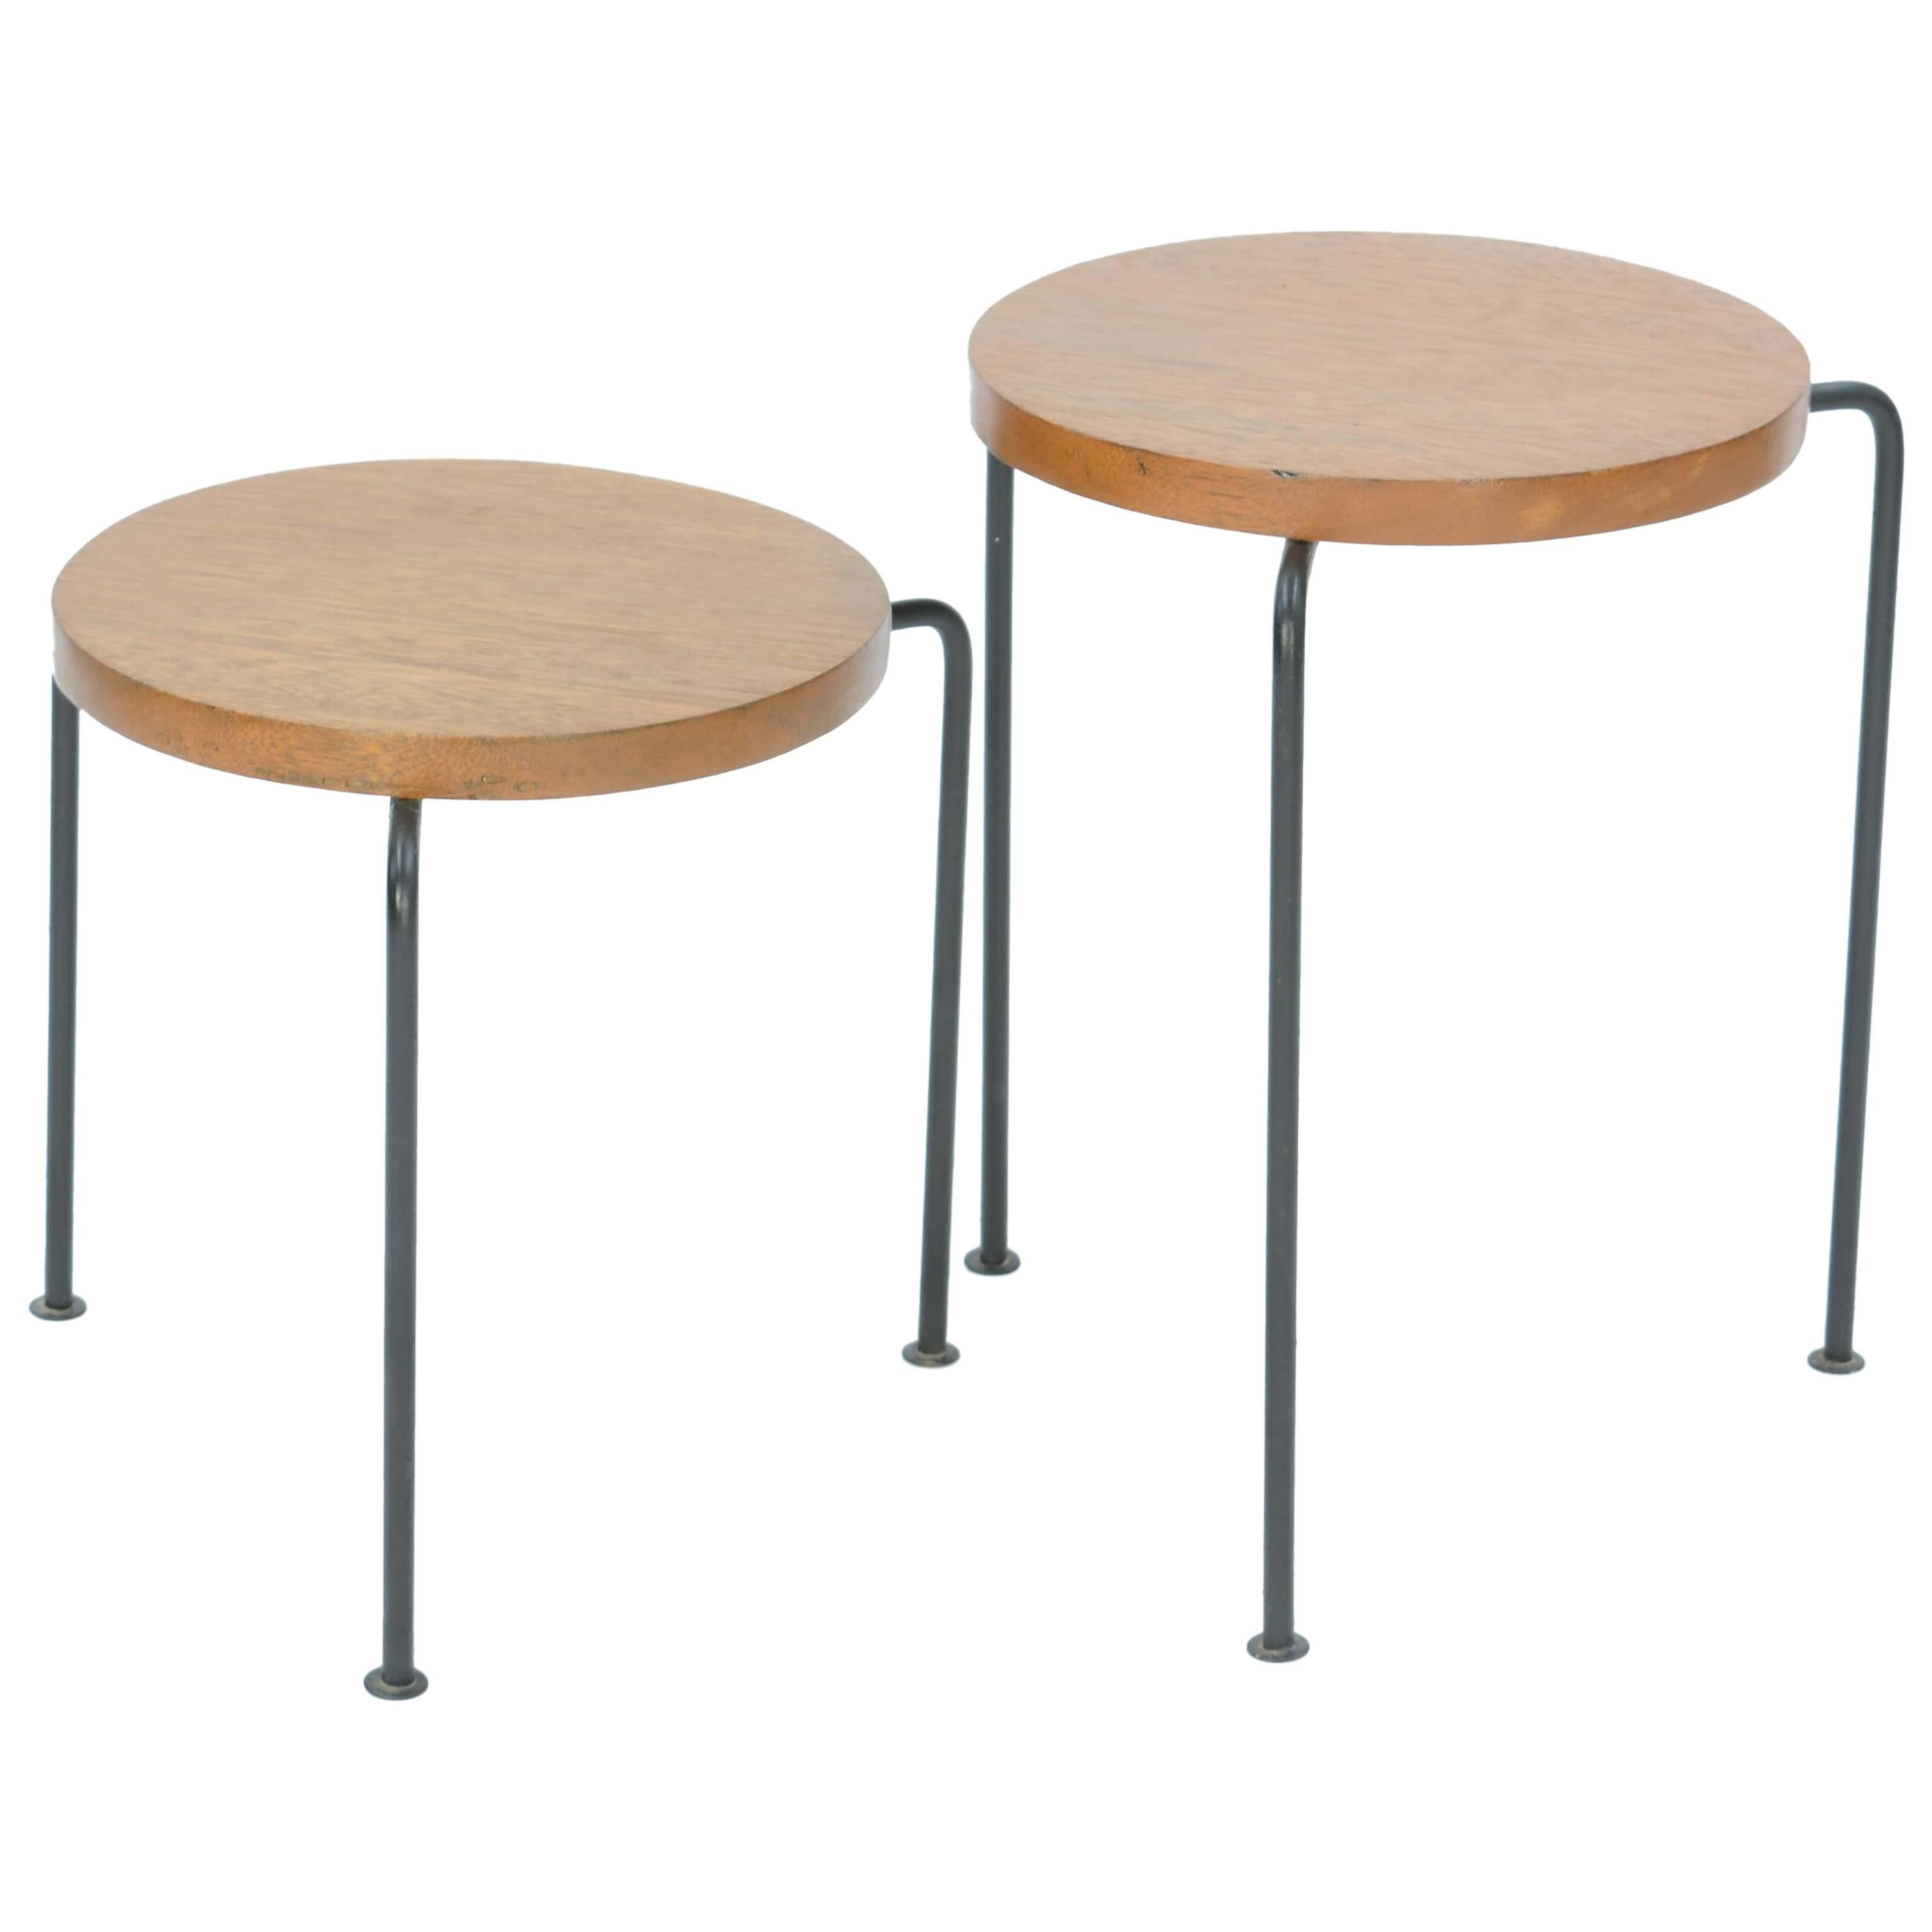 Set of Two Luther Conover Nesting Stools or Side Tables by Pacific Design Group